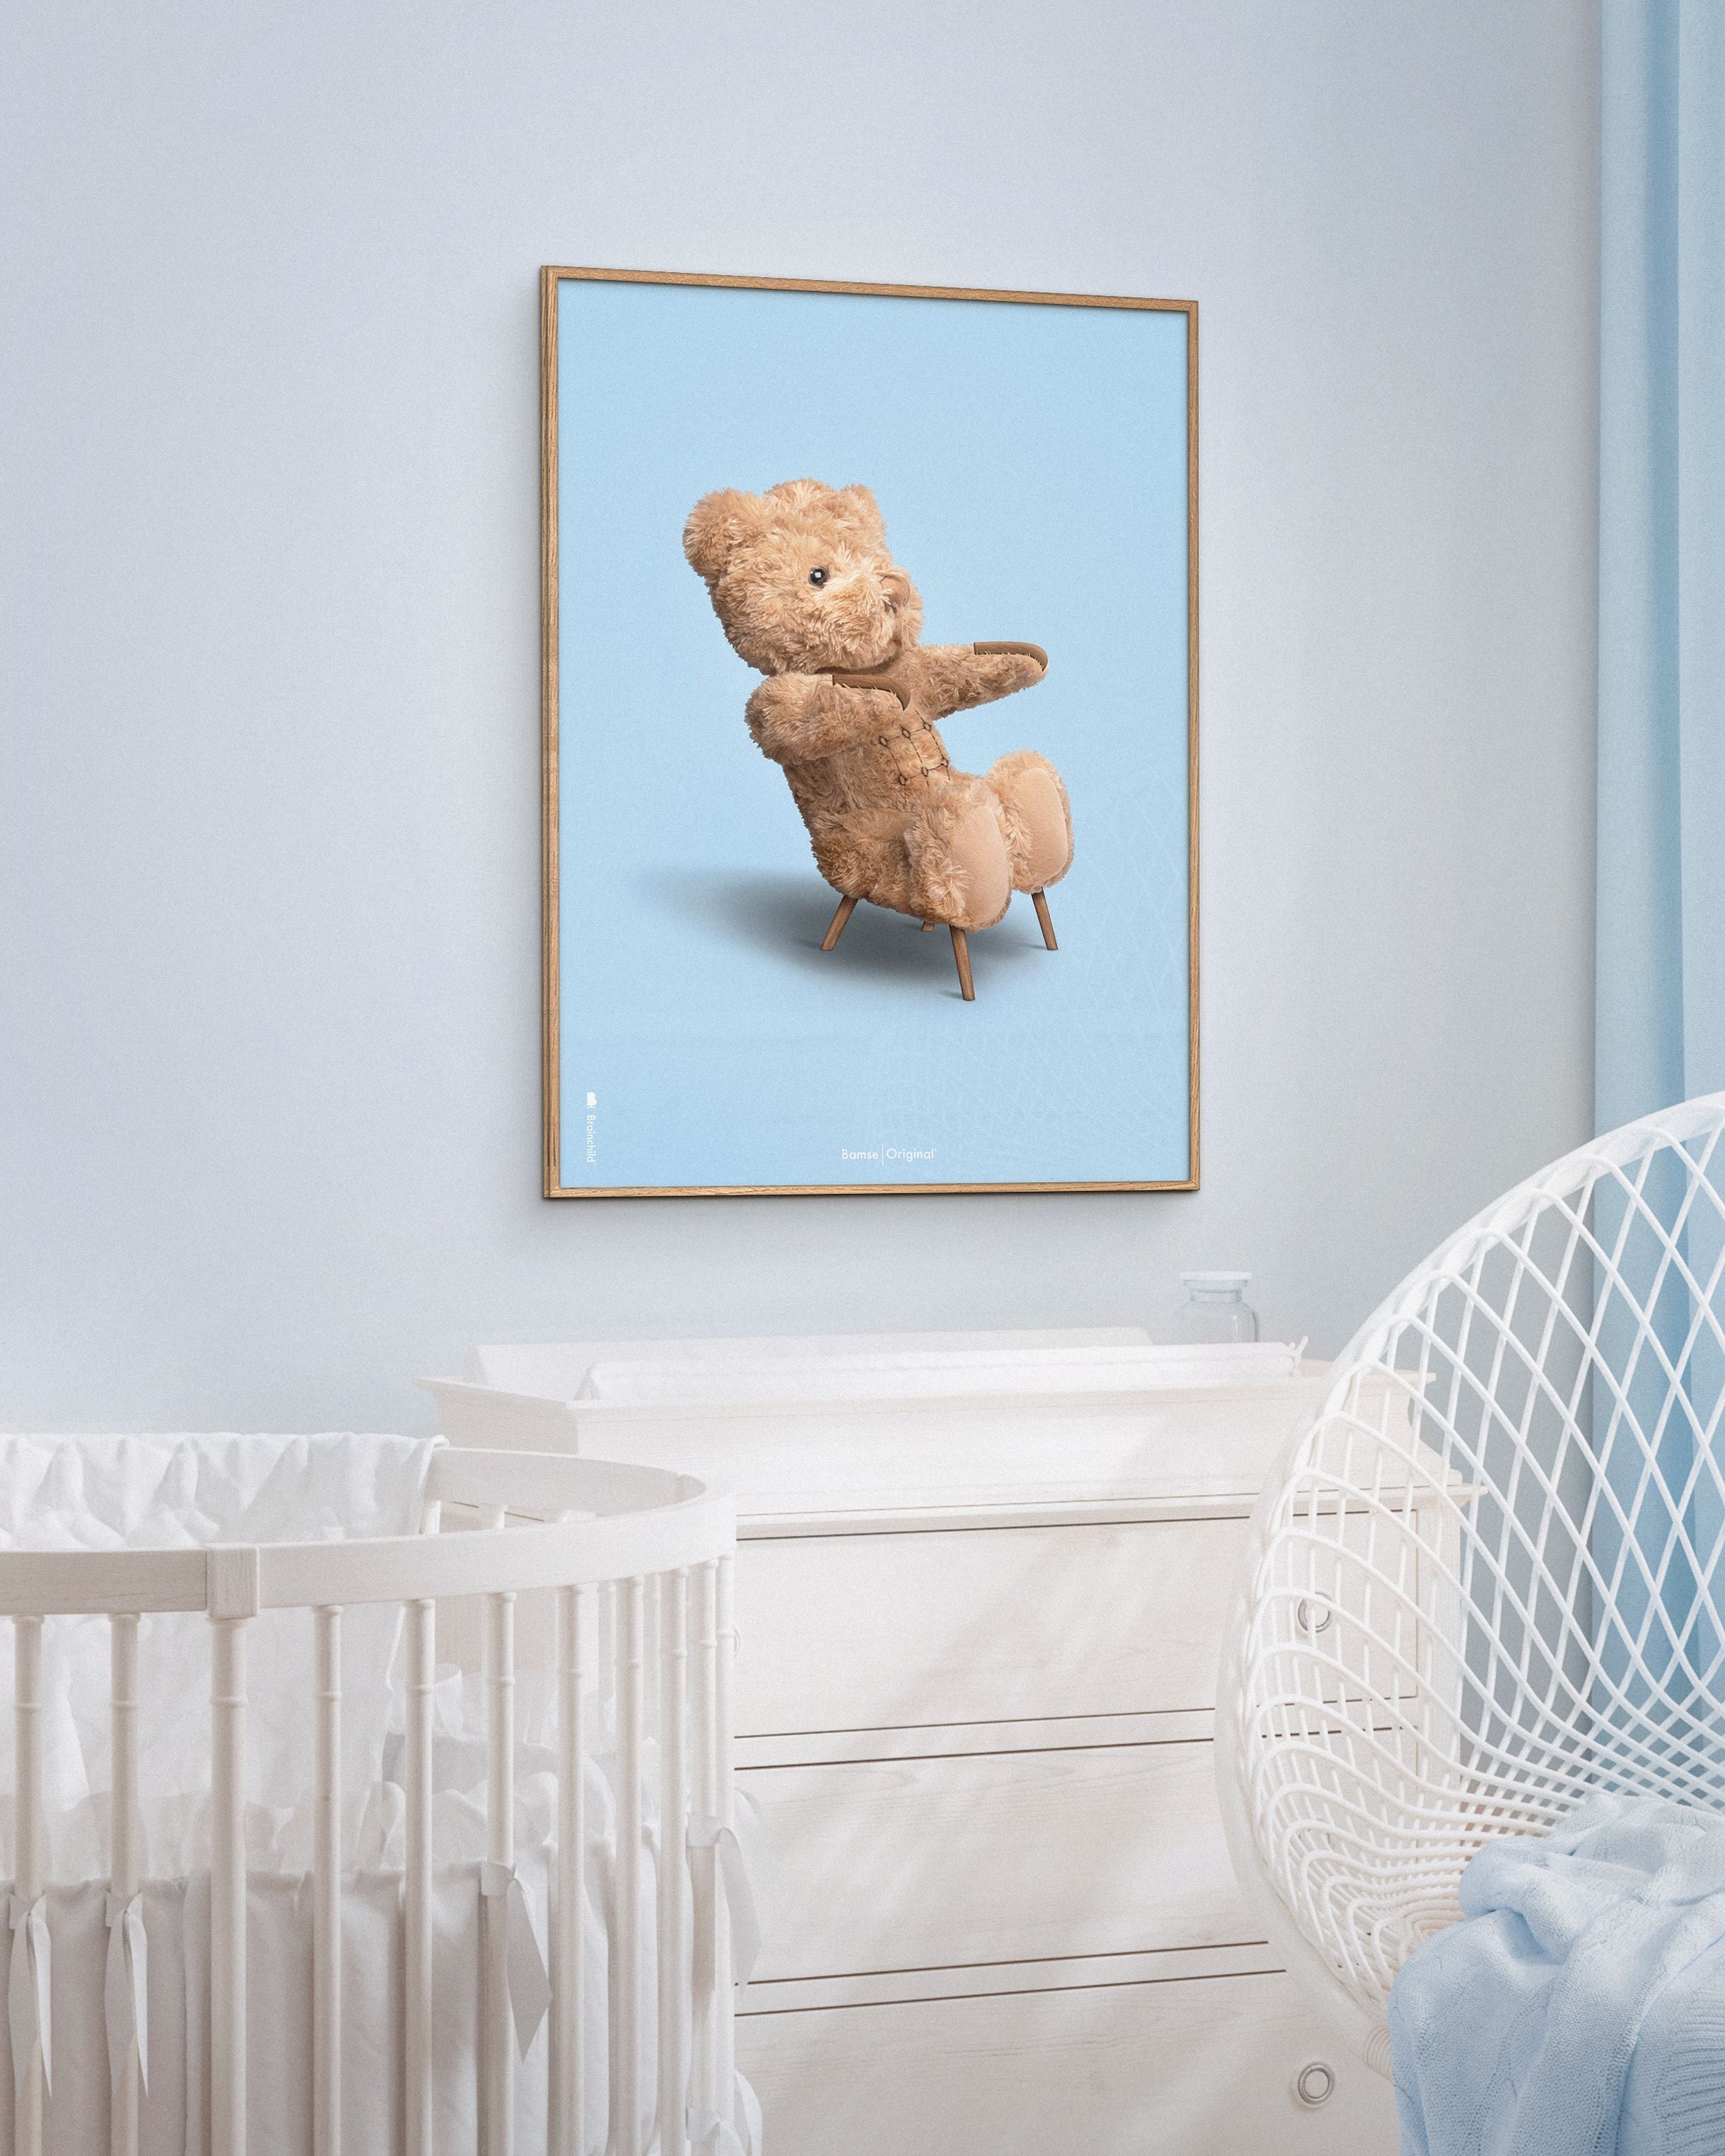 Brainchild Teddy Bear Classic Poster Frame Made Of Black Lacquered Wood 30x40 Cm, Light Blue Background